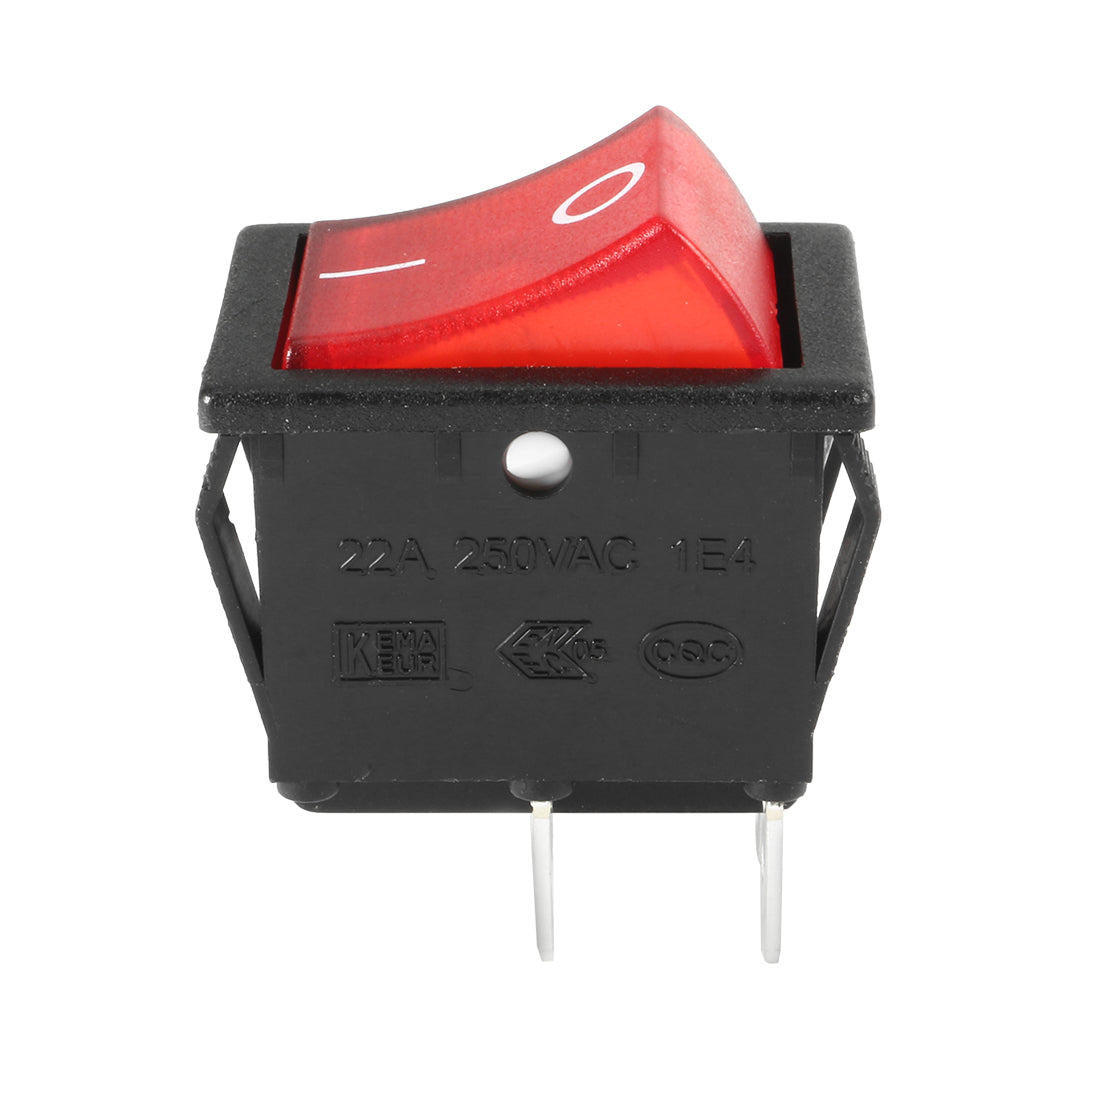 uxcell Uxcell Red Illuminated Light On/Off DPST Boat Rocker Switch 22A/250V 20A/125V AC 5pcs